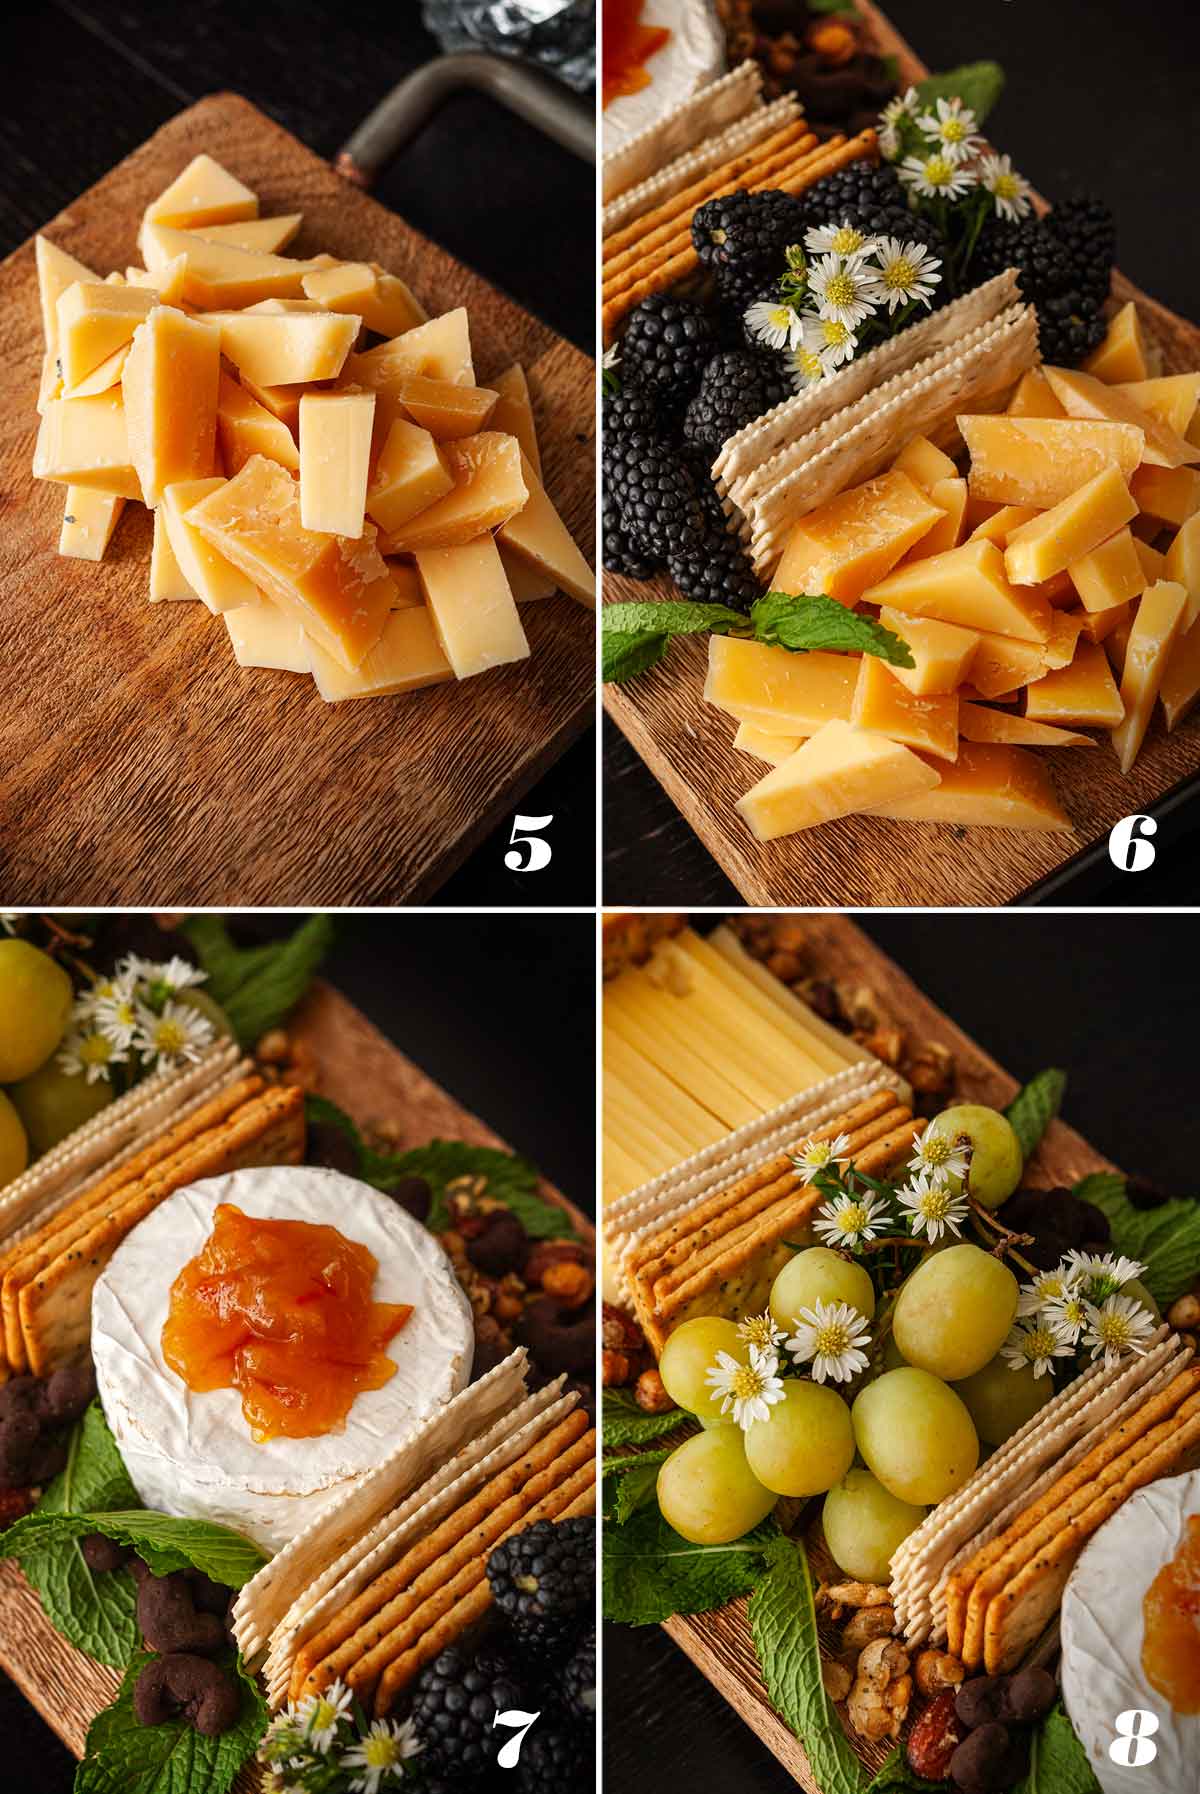 A collage of 4 numbered images showing how to add cheese and grapes to a cheeseboard.